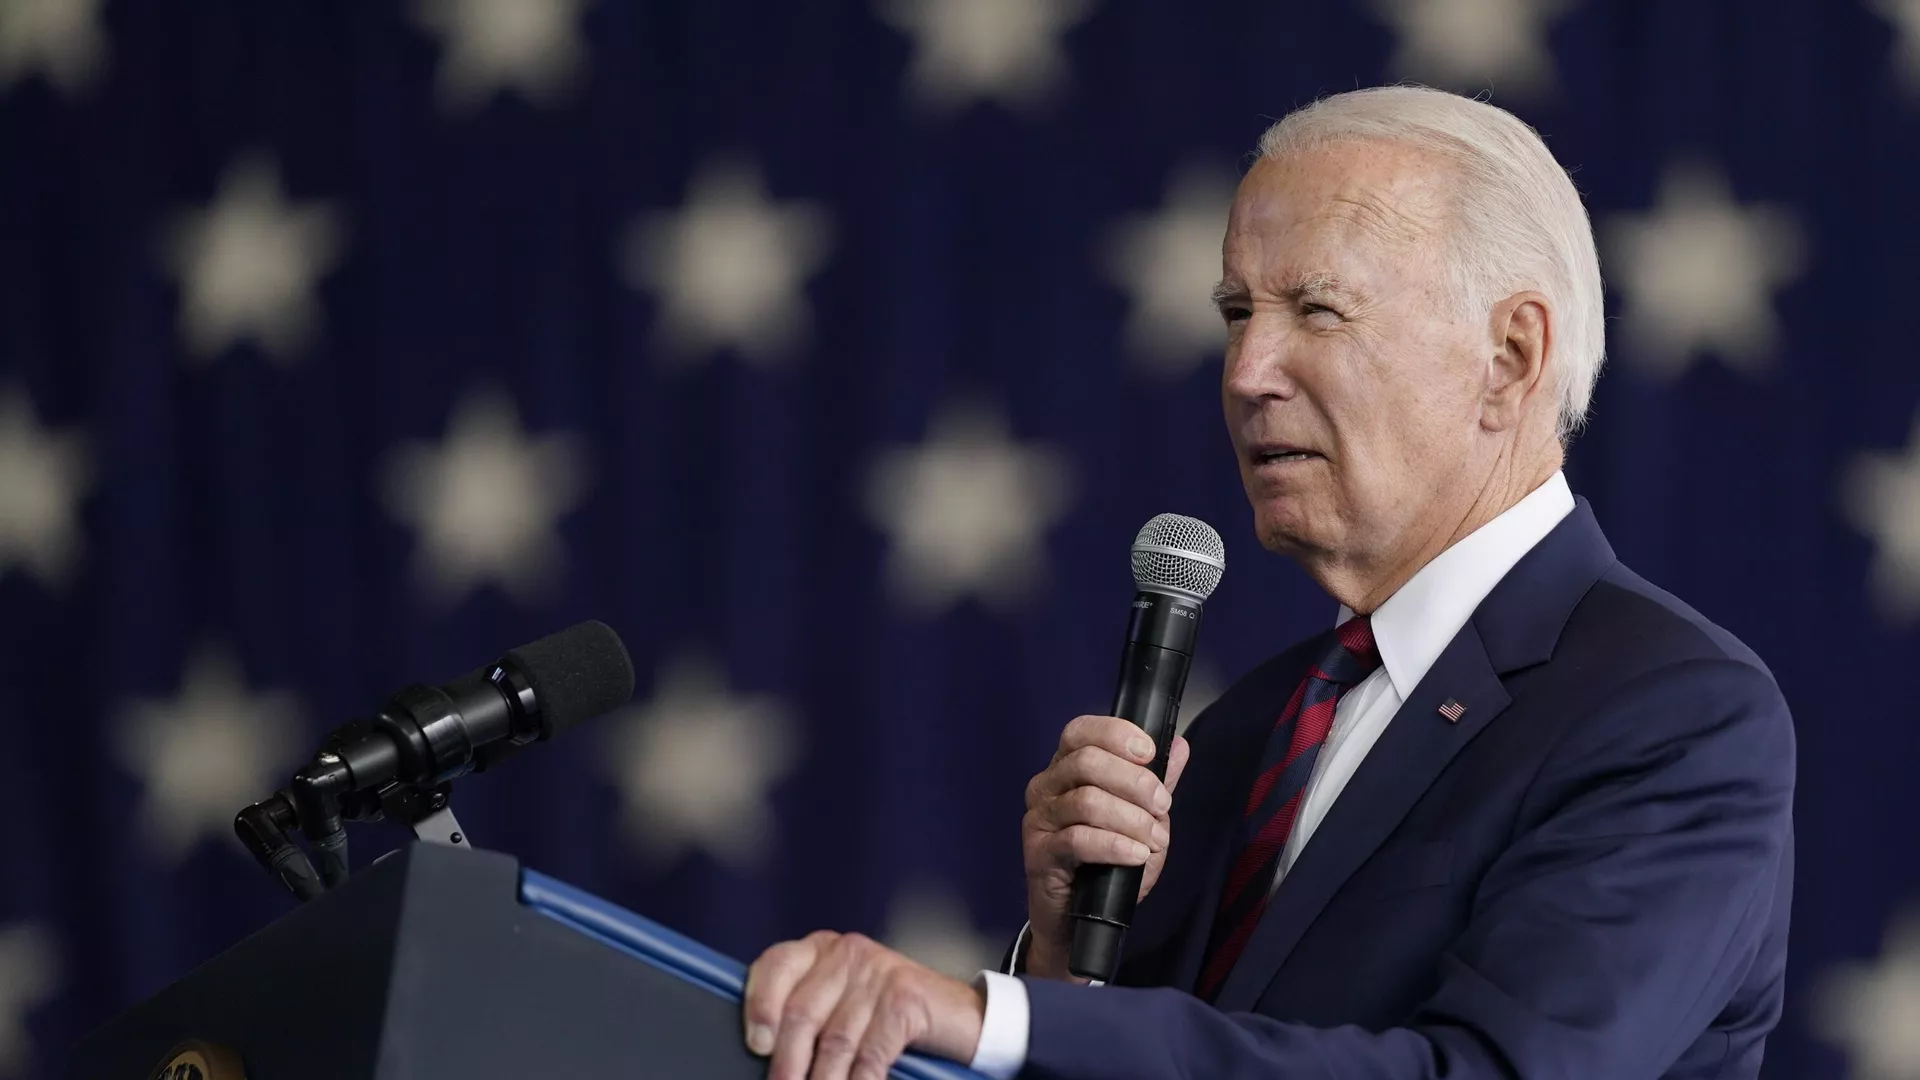 Israeli Prime Minister’s phone call with Biden receives unconditional support from the United States